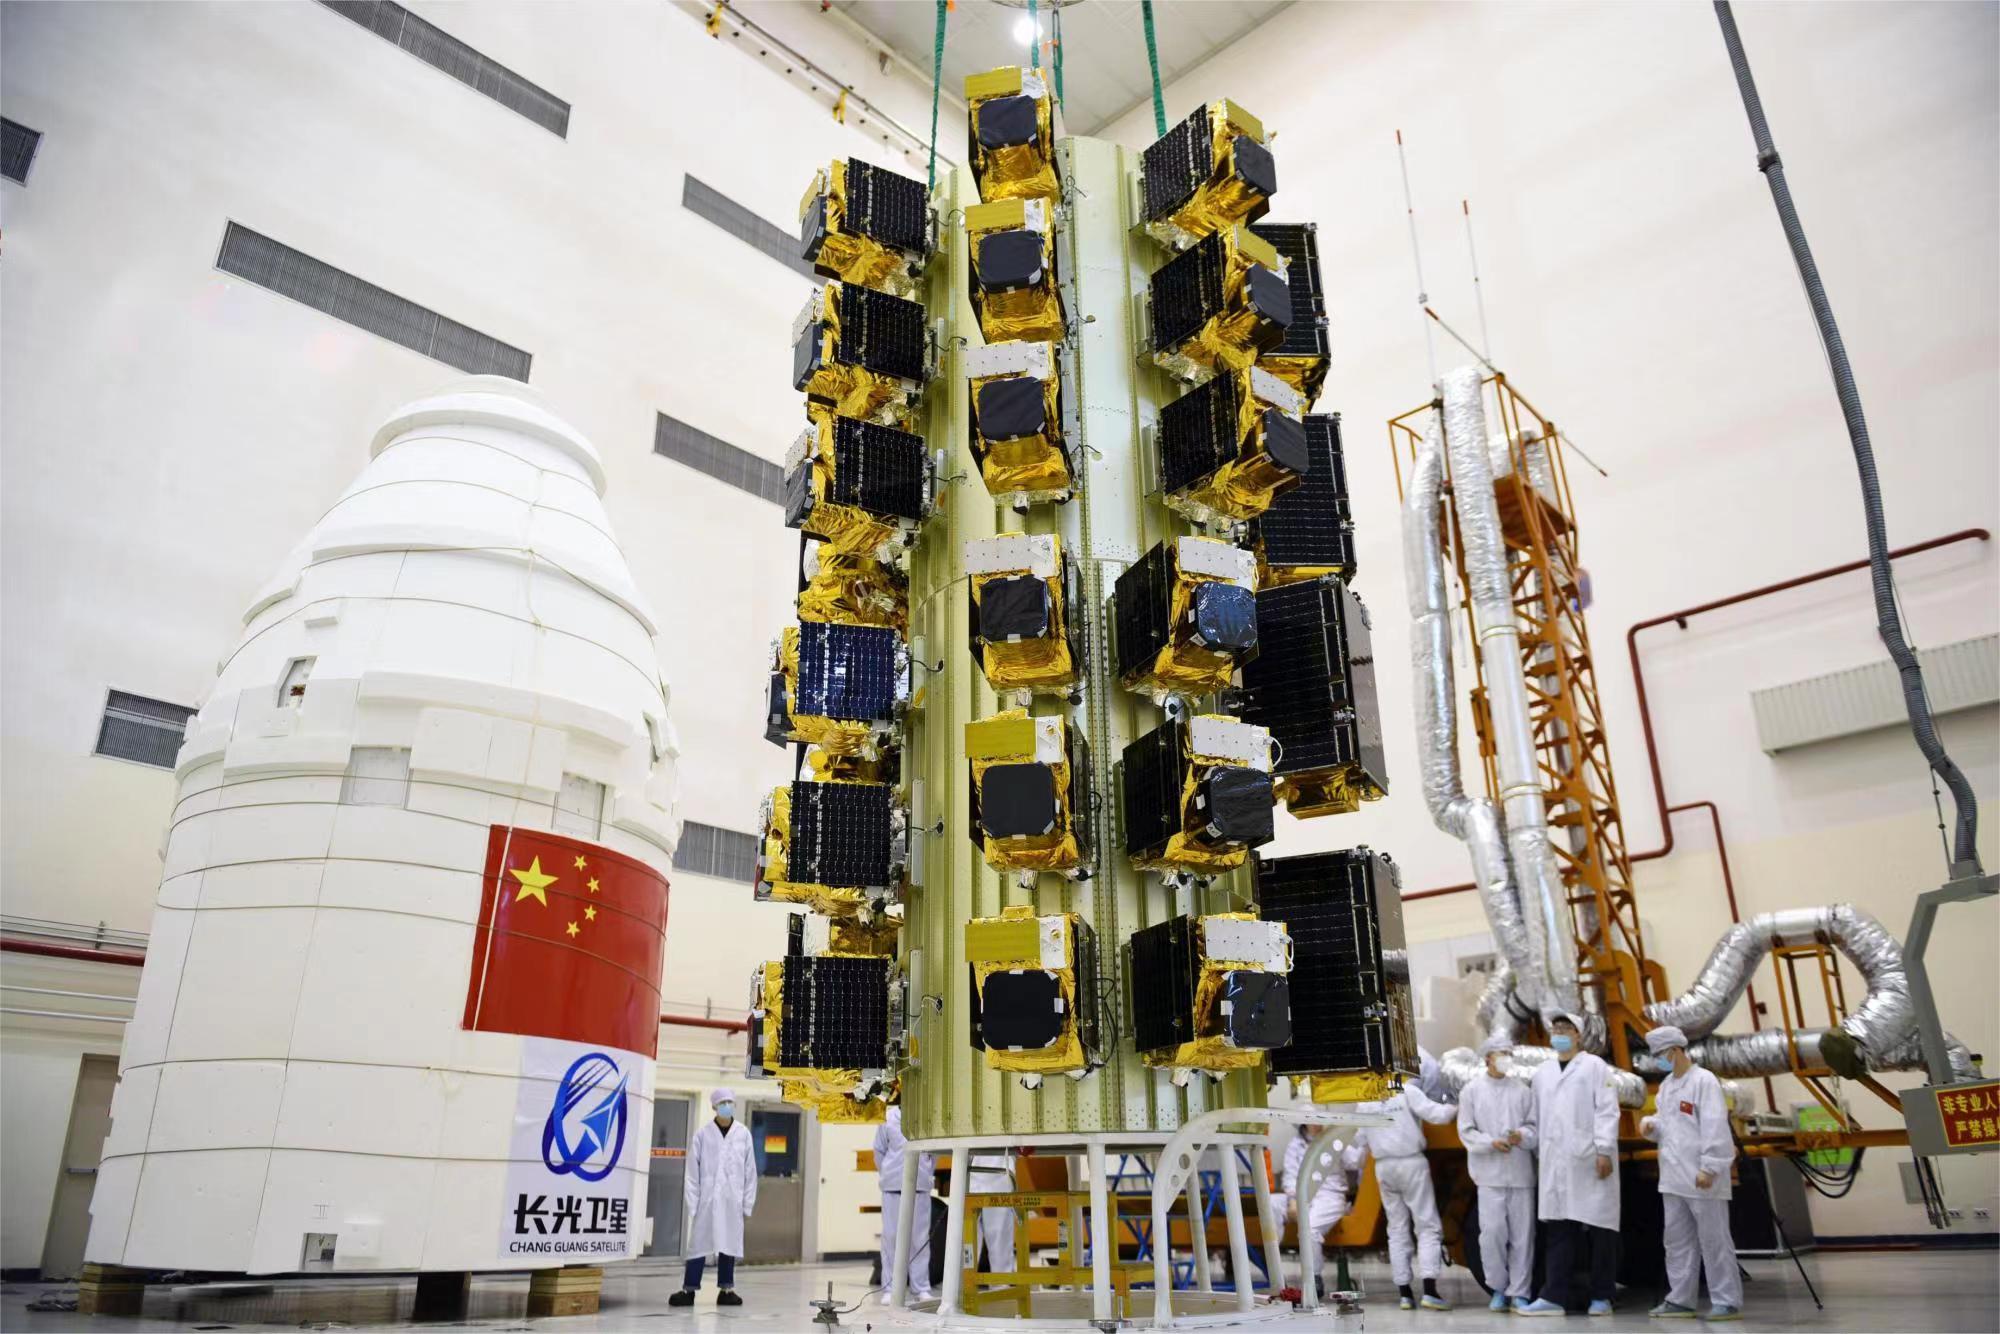 CGSTL, which successfully realizes 108 satellites in orbit through 21 successful launches, is the first commercial remote sensing satellite company in China. 